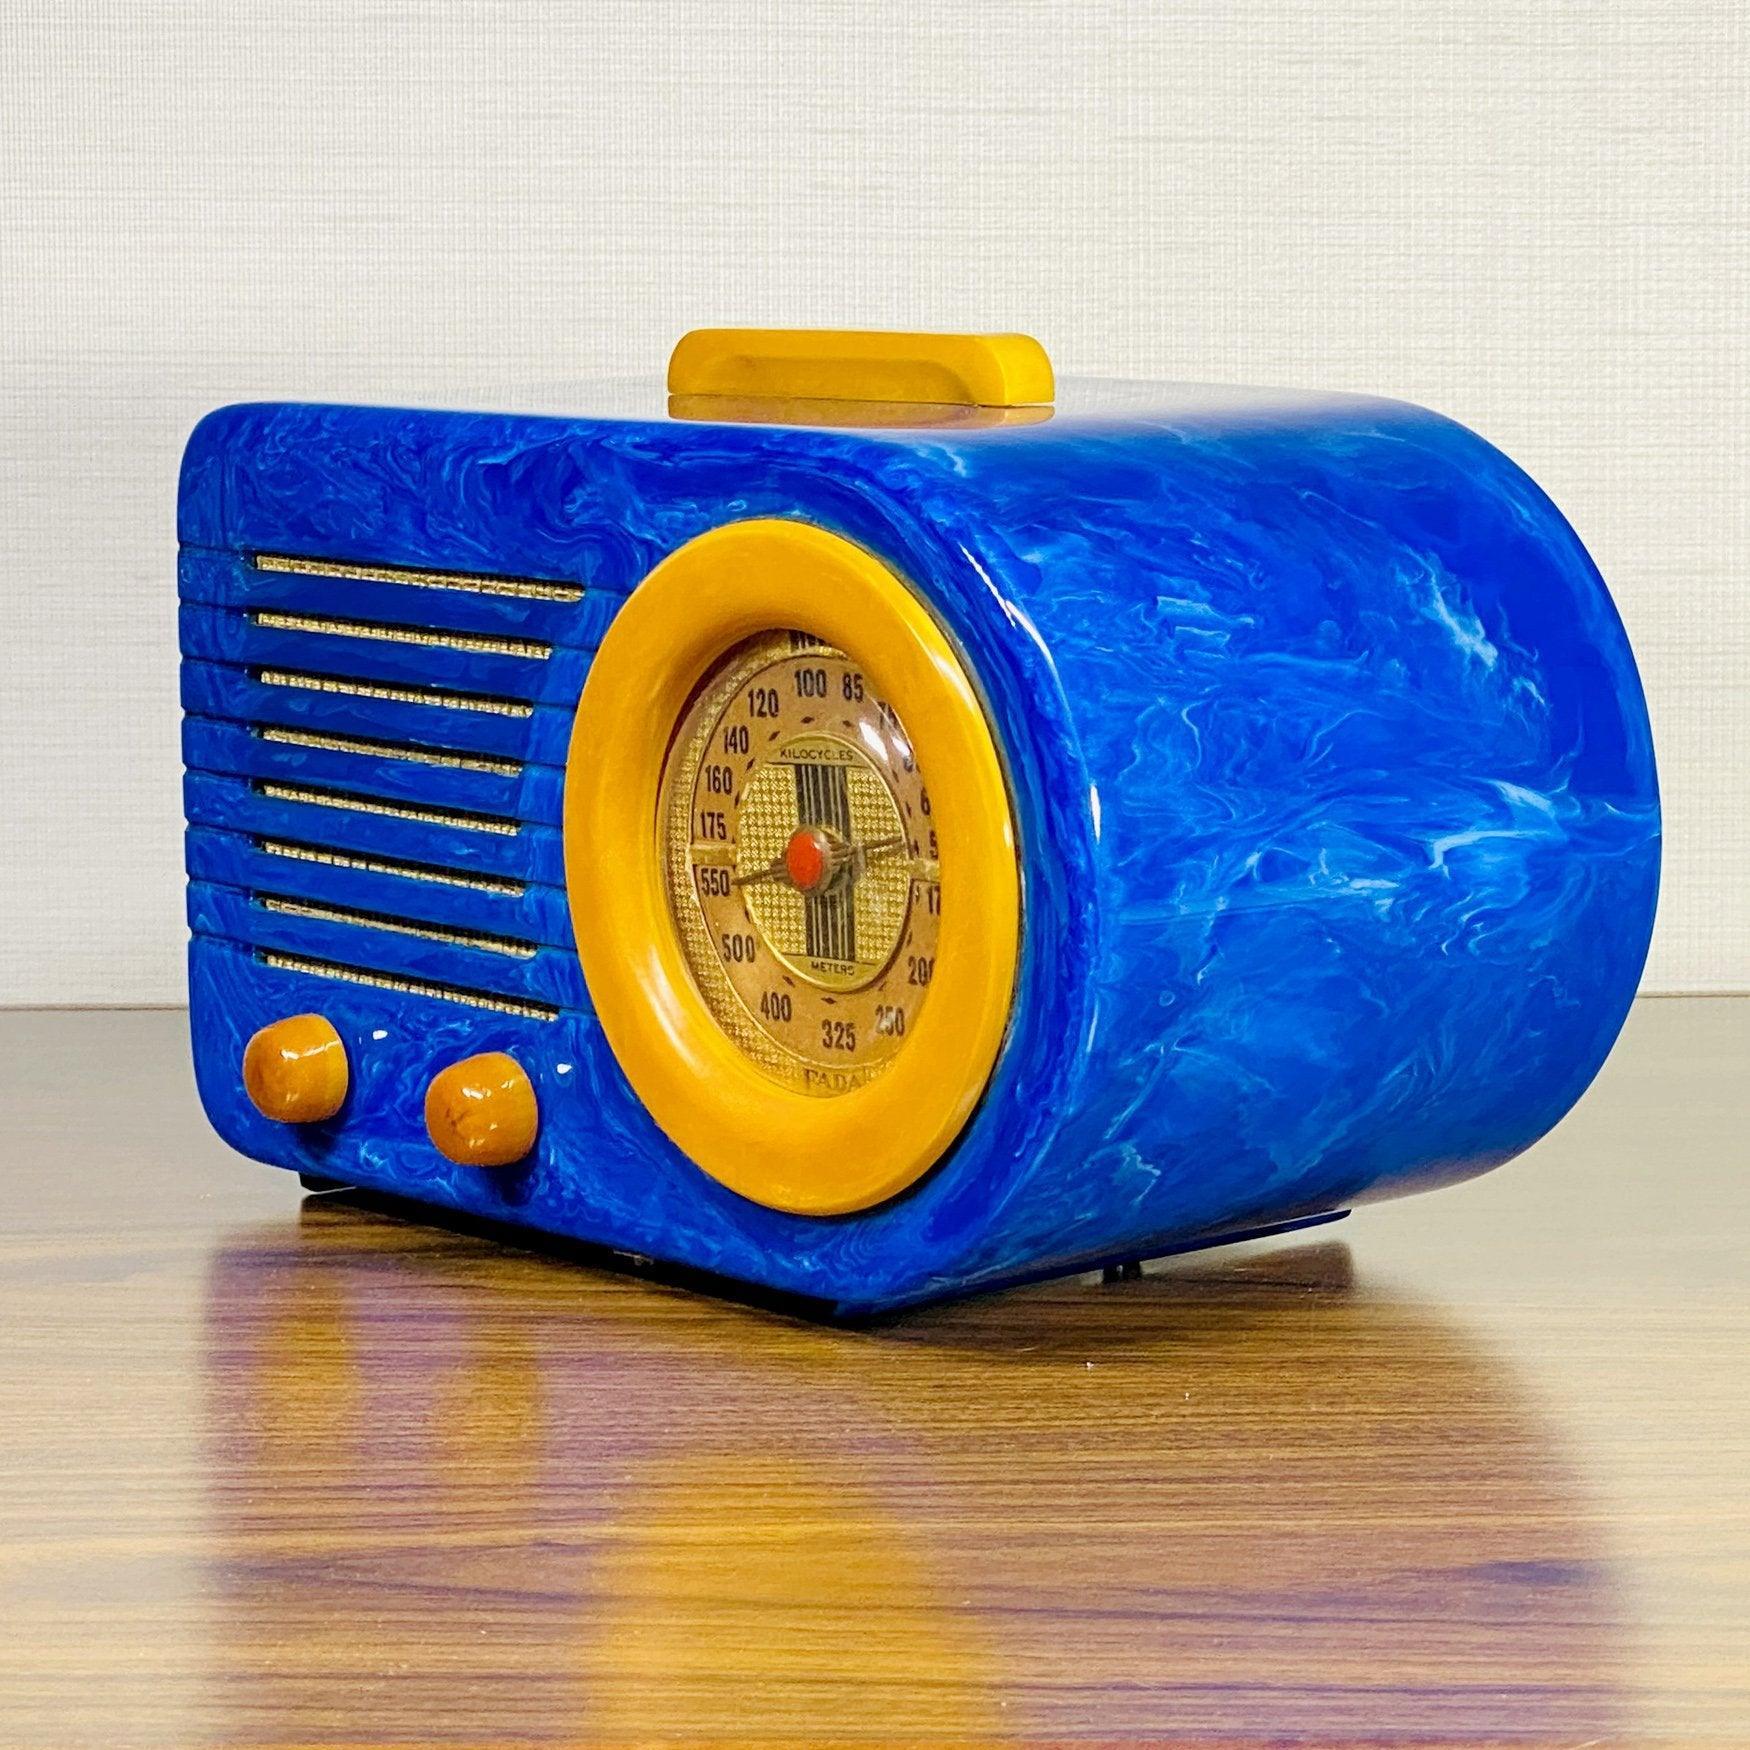 FADA 115 Bullet Catalin Radio- Blue with White Swirling